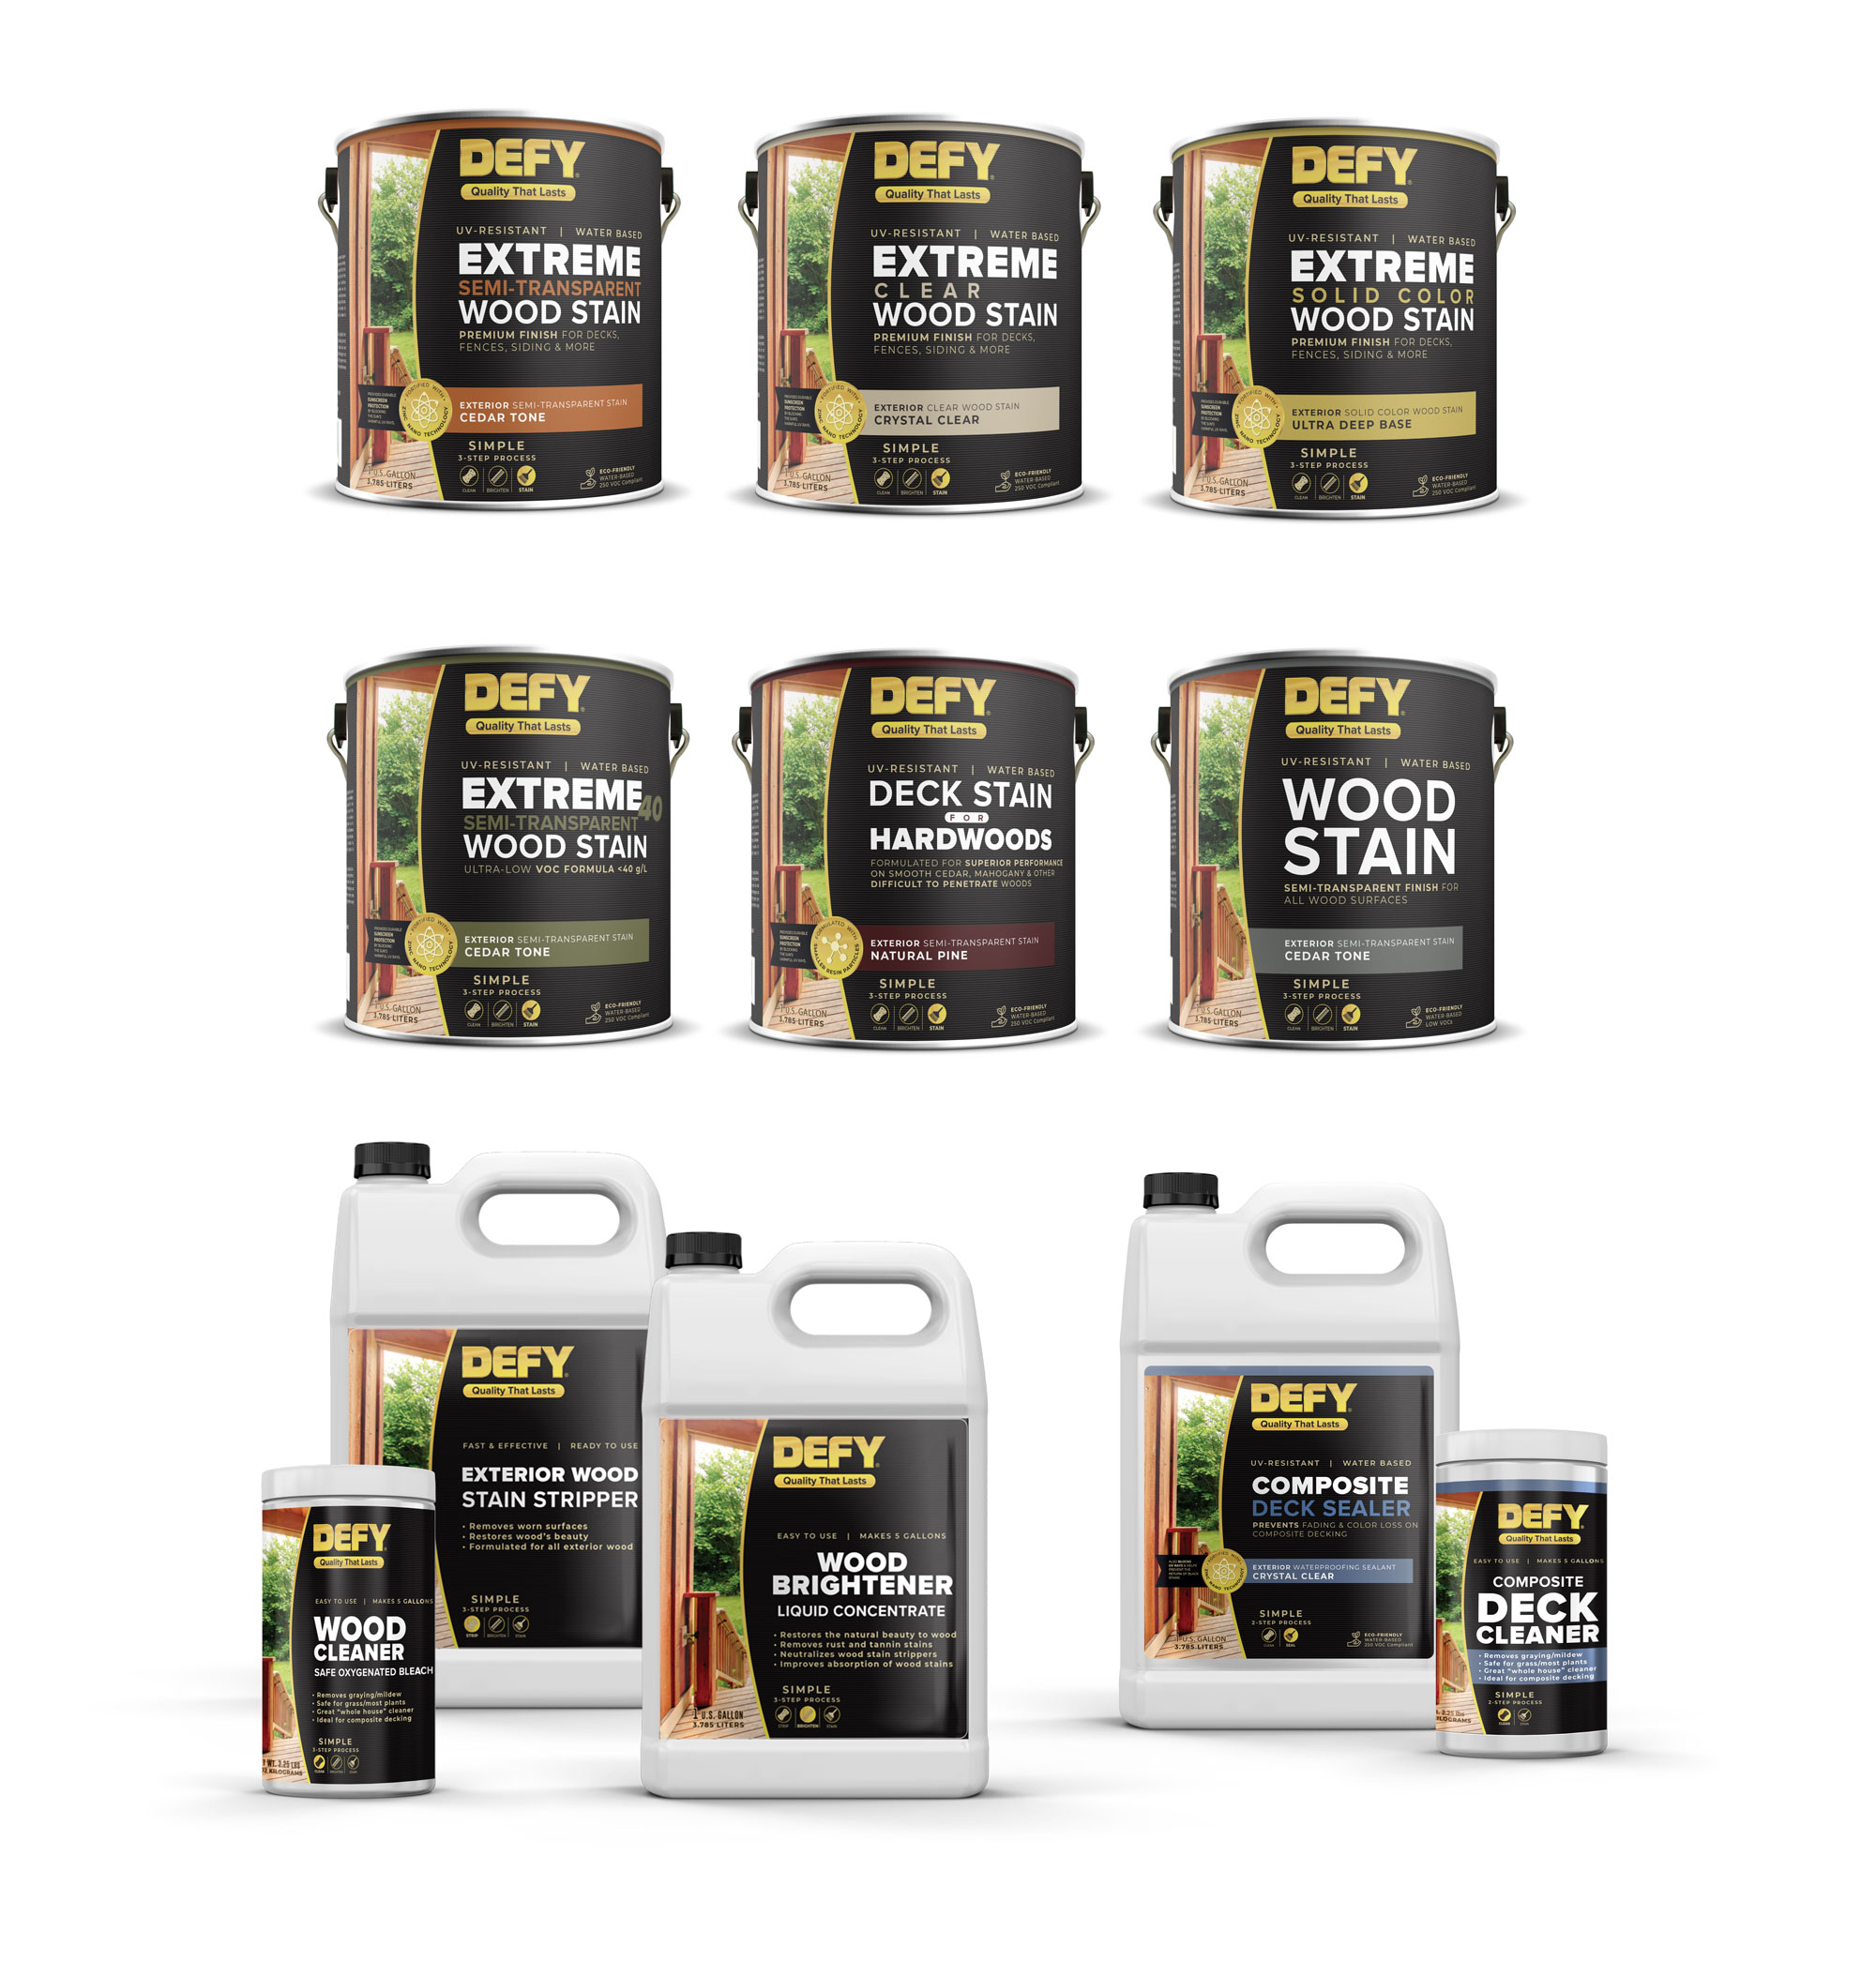 Defy Stain New Product Labels